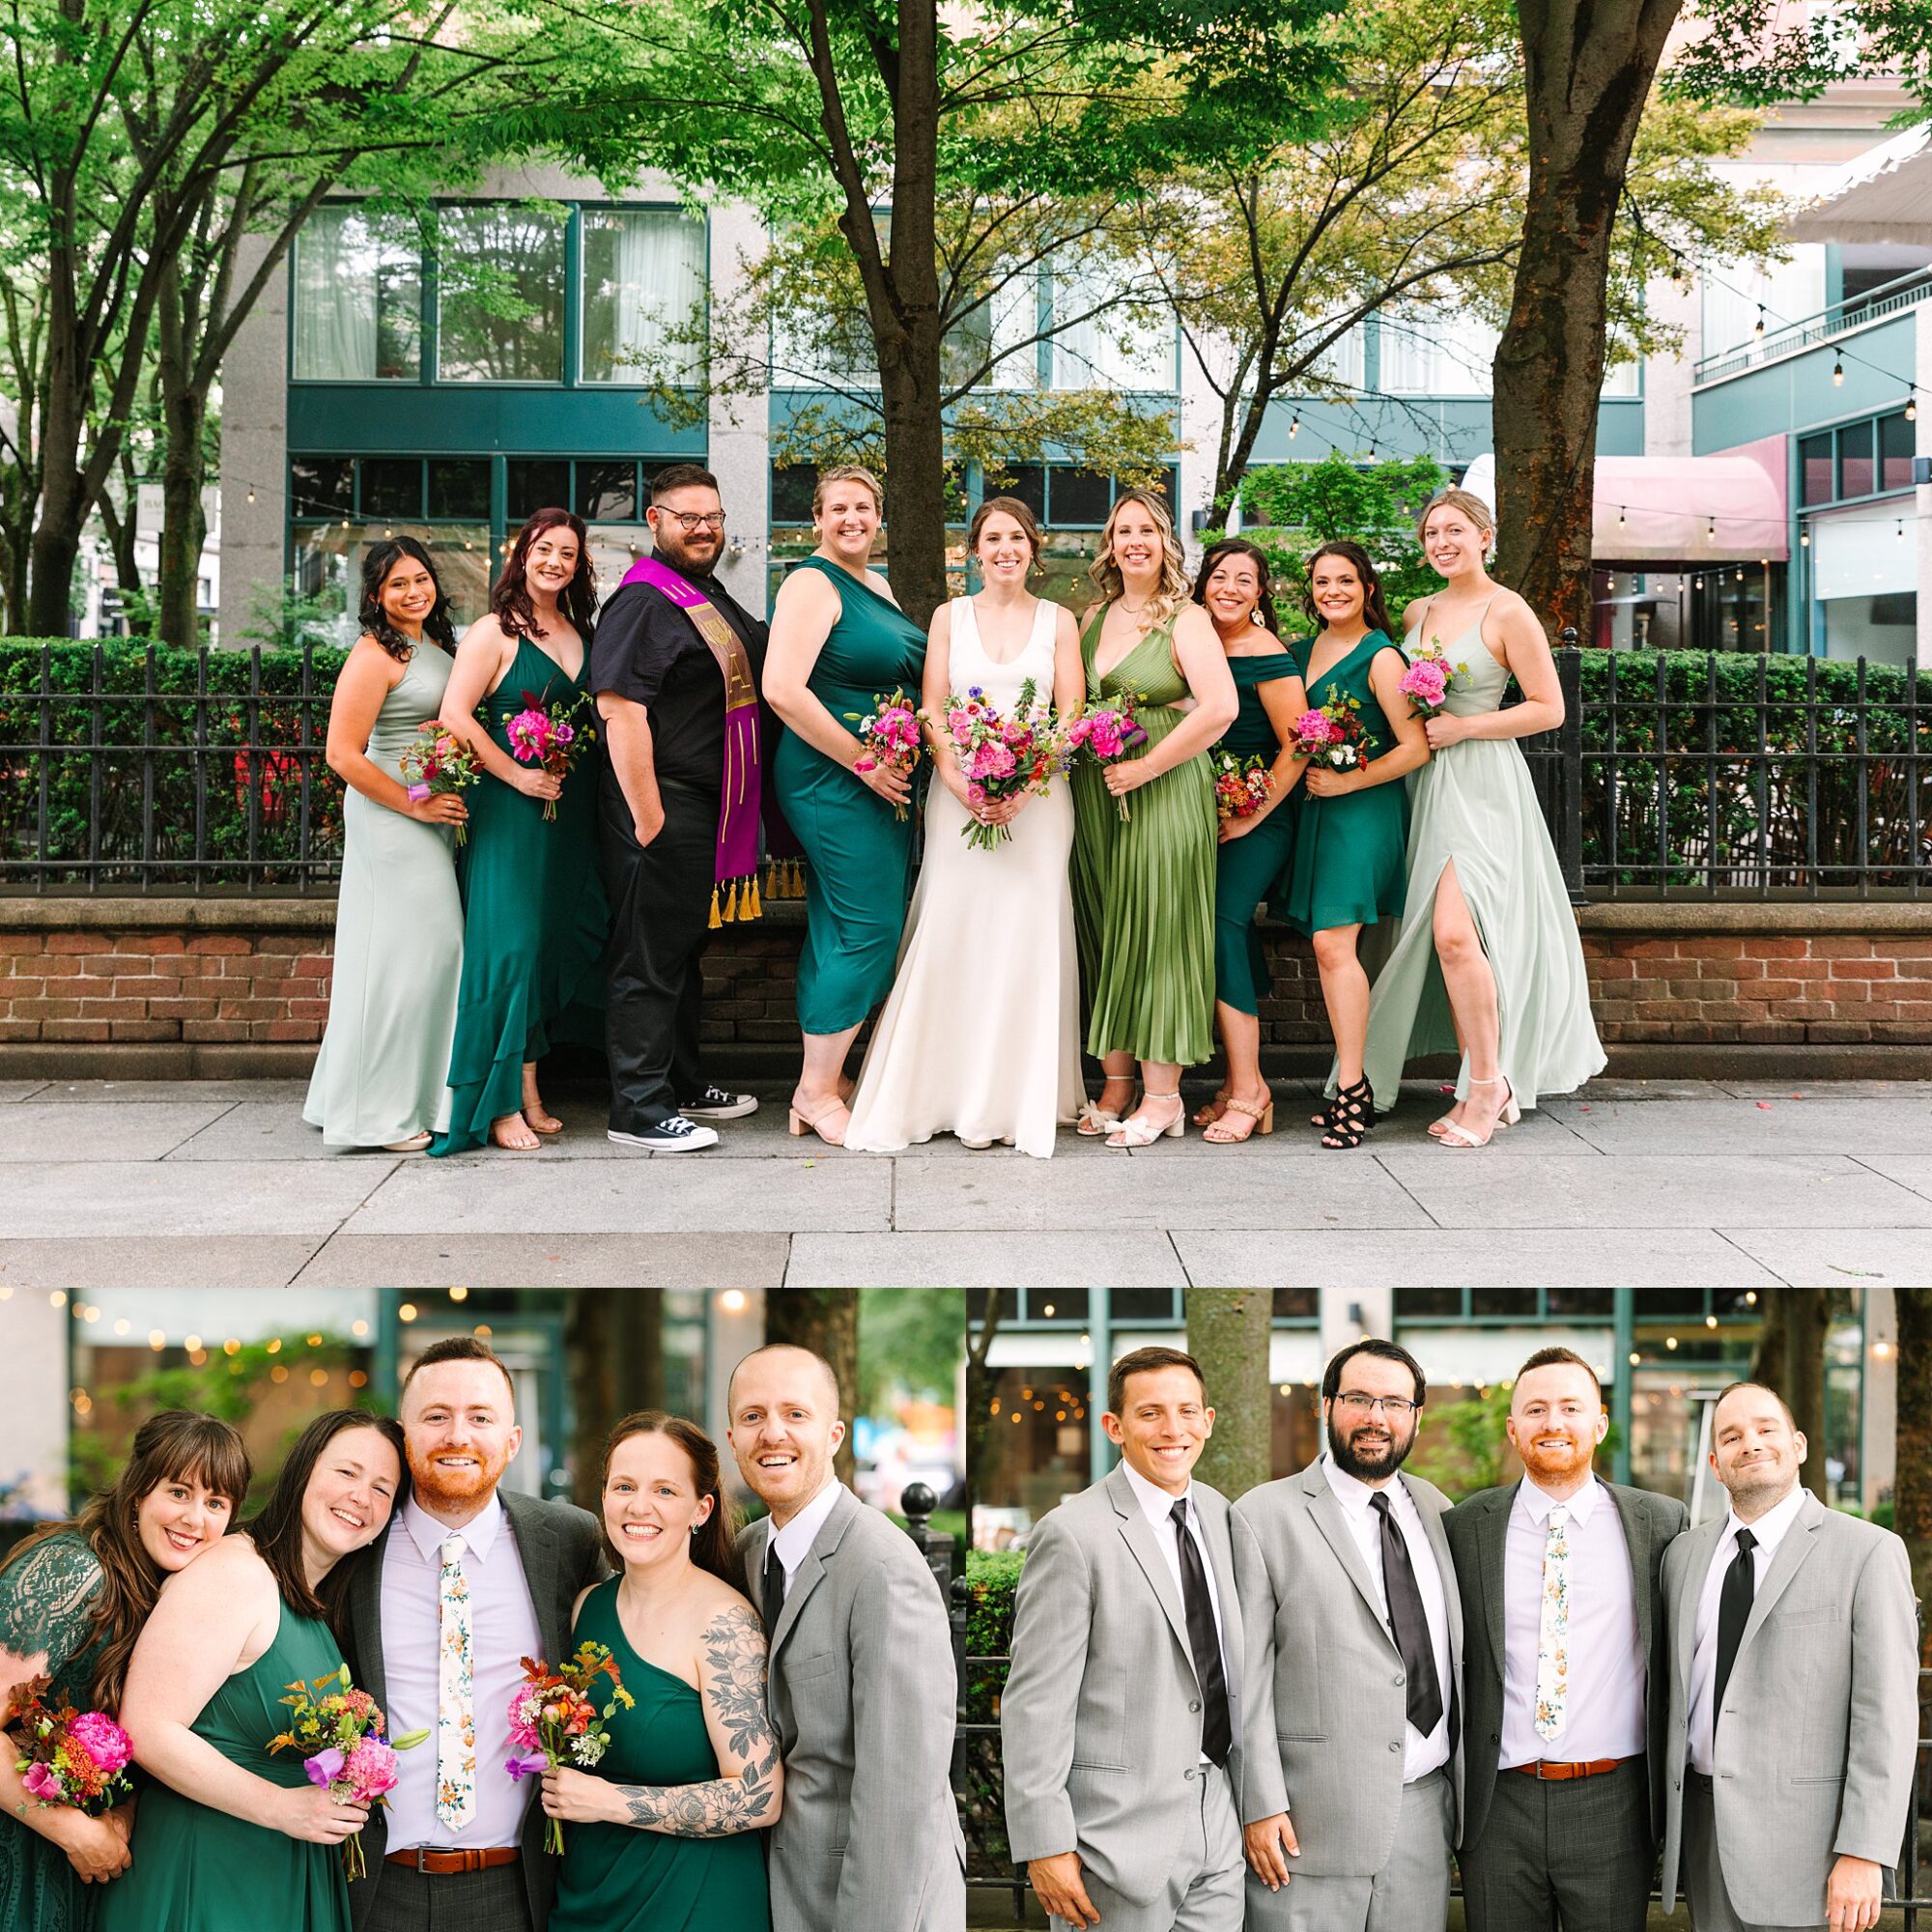 jewel tone wedding party colors in summertime providence RI wedding